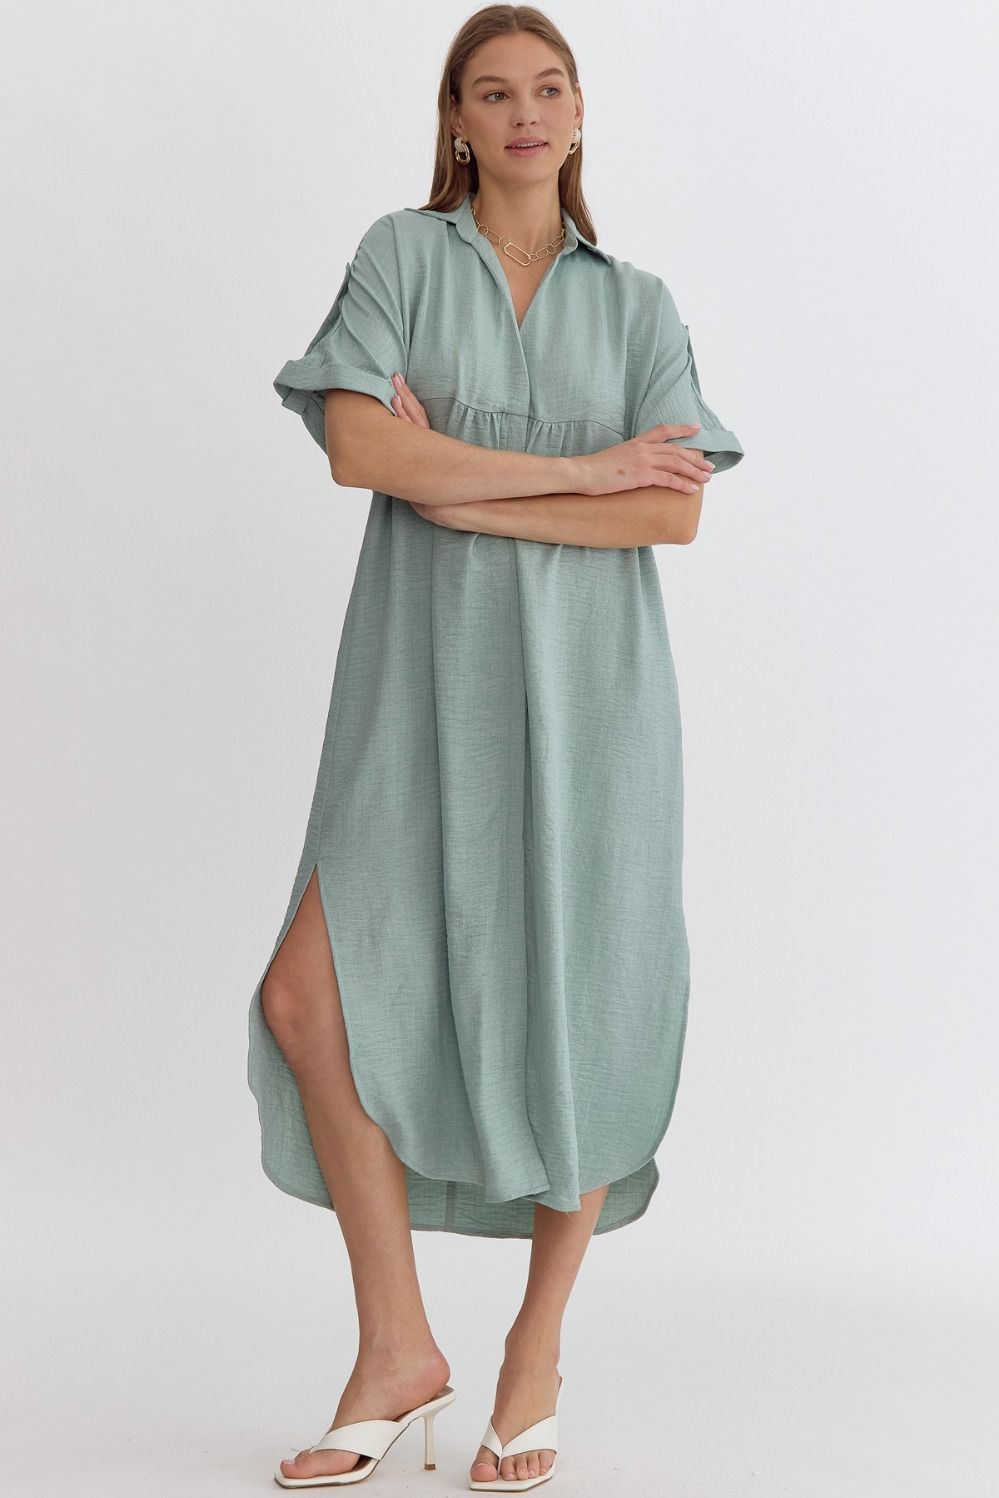 The Day By The Pool Seafoam Dress